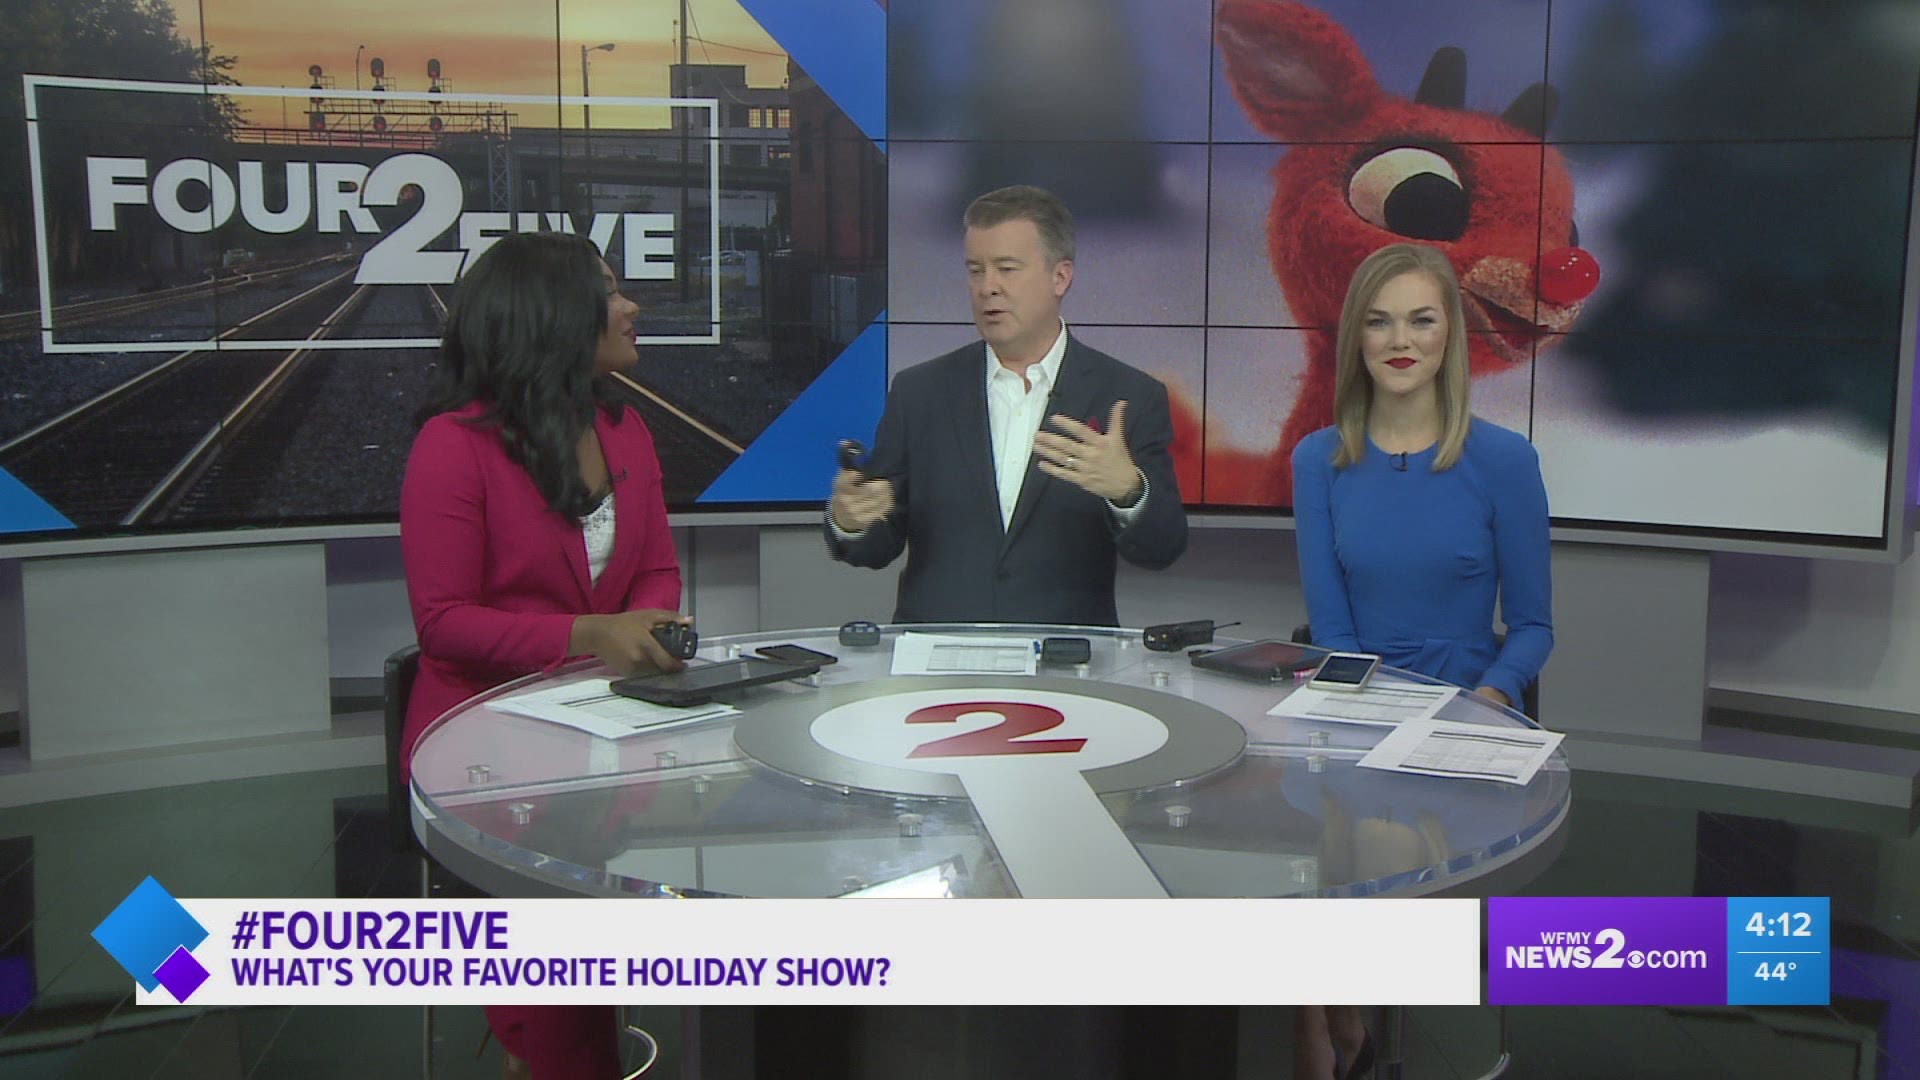 Eric Chilton hits the streets to see which show everyone is most excited for this holiday season.